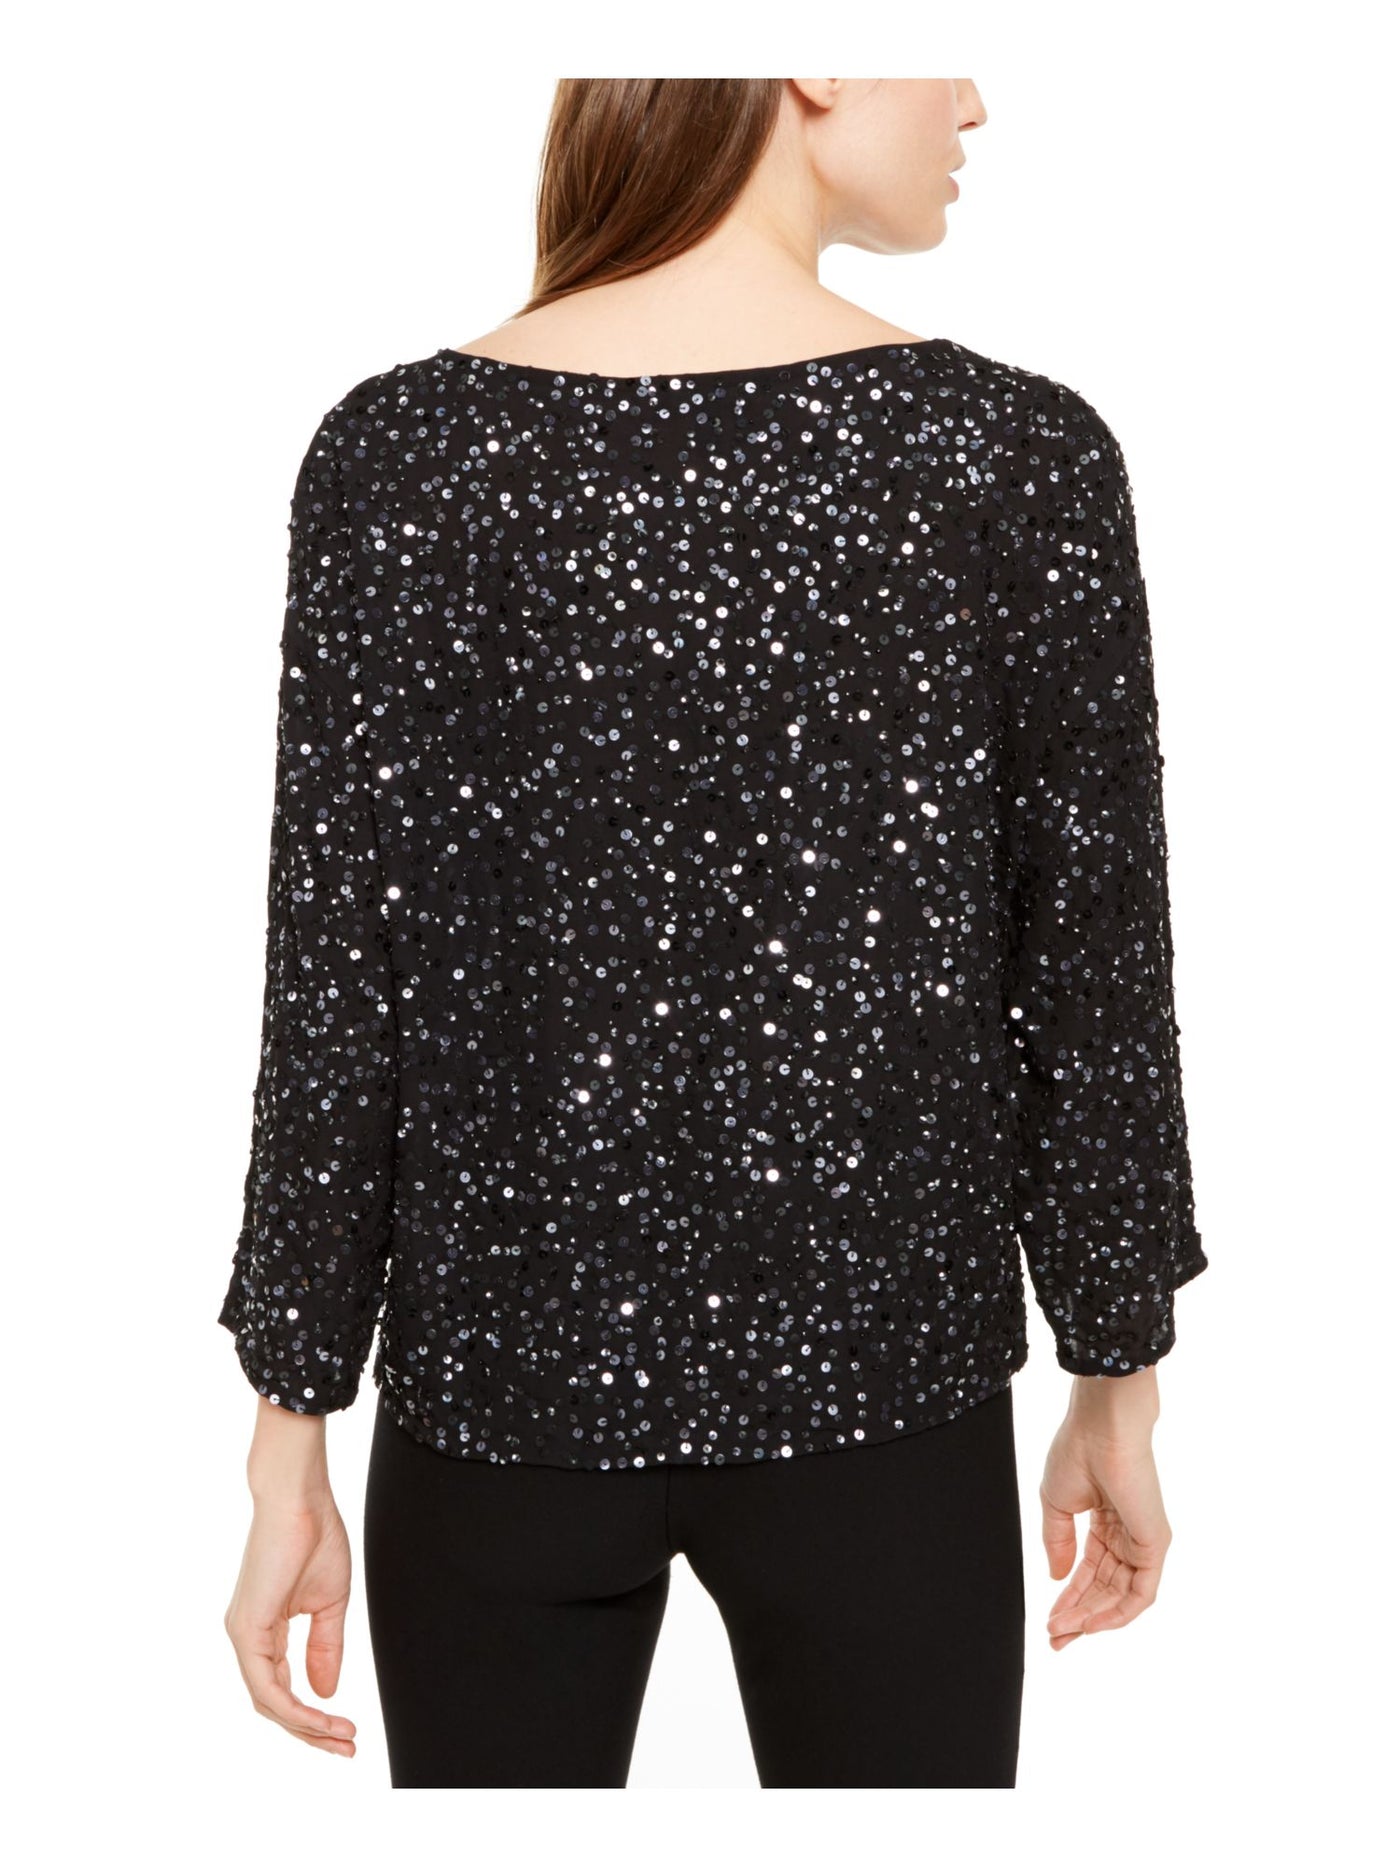 EILEEN FISHER Womens Black Silk Sequined Bell Sleeve Boat Neck Party Top S